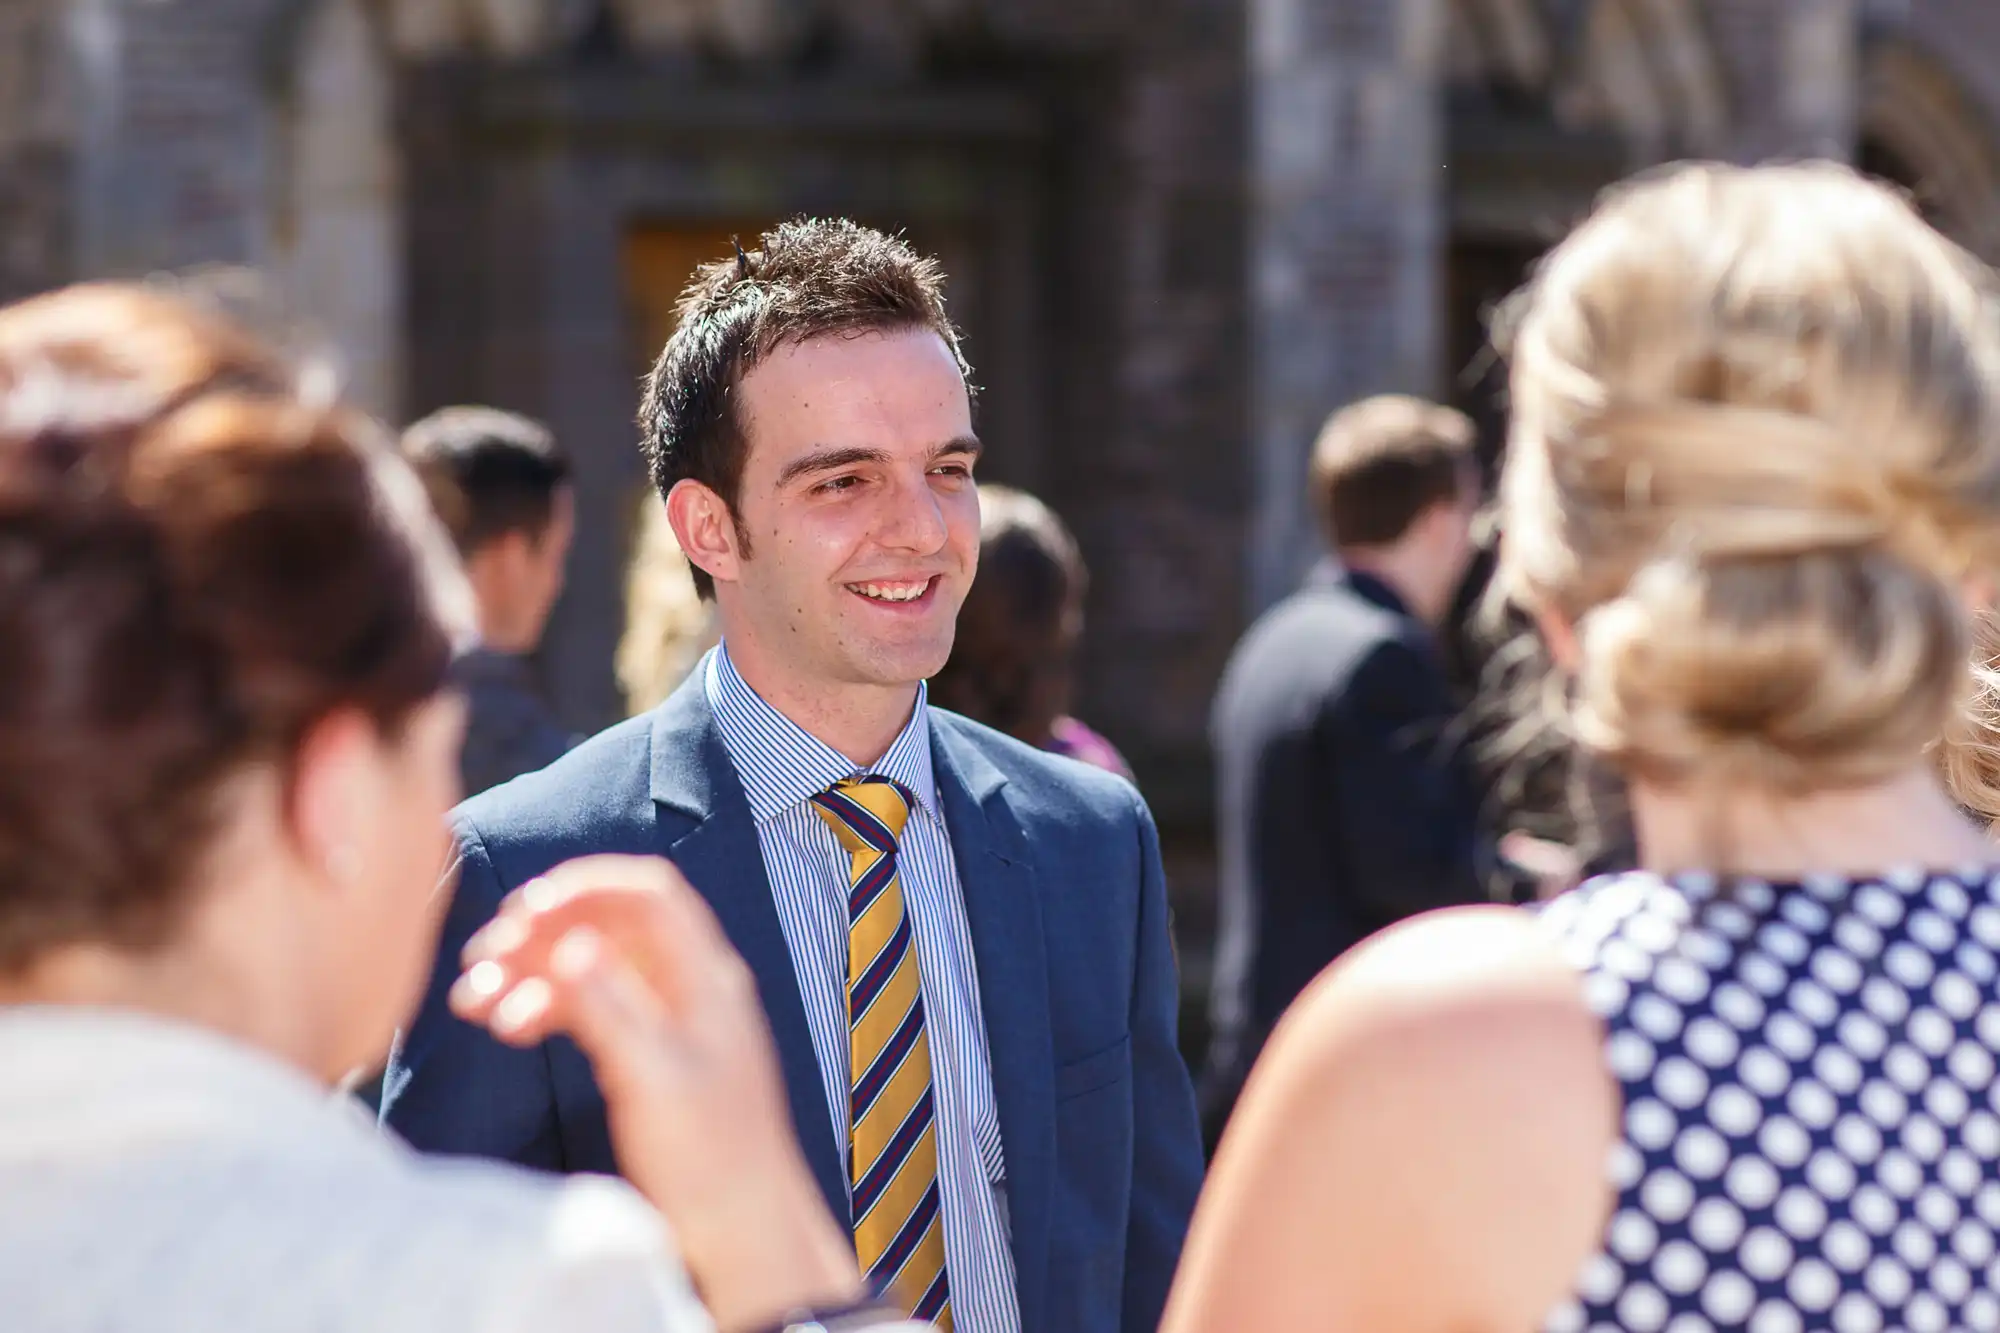 A man in a suit smiling while conversing with guests at a sunny, formal outdoor gathering.